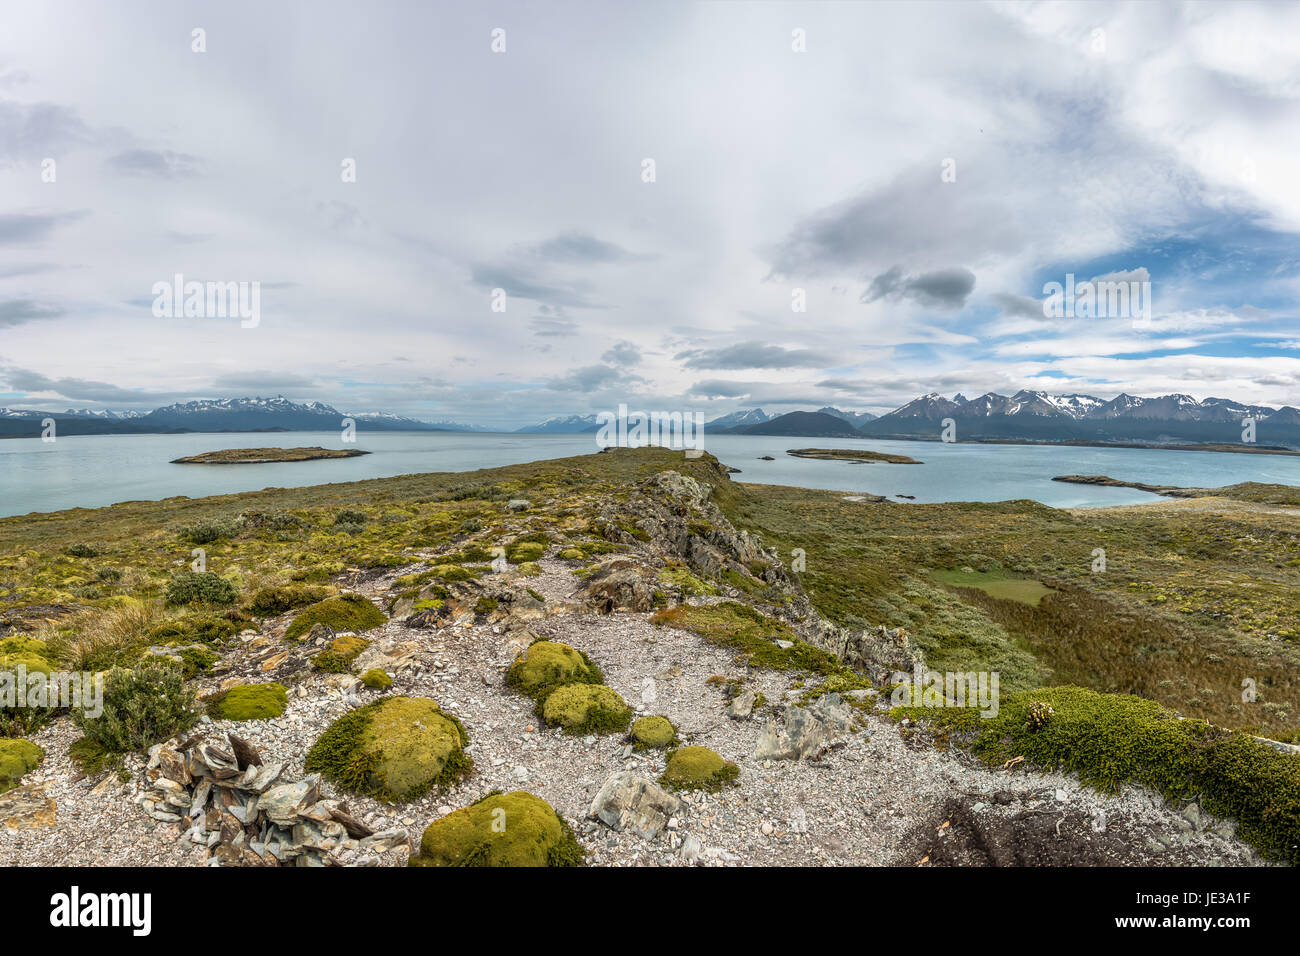 Panoramic view of Island and mountains view in Beagle Channel - Ushuaia, Tierra del Fuego, Argentina Stock Photo